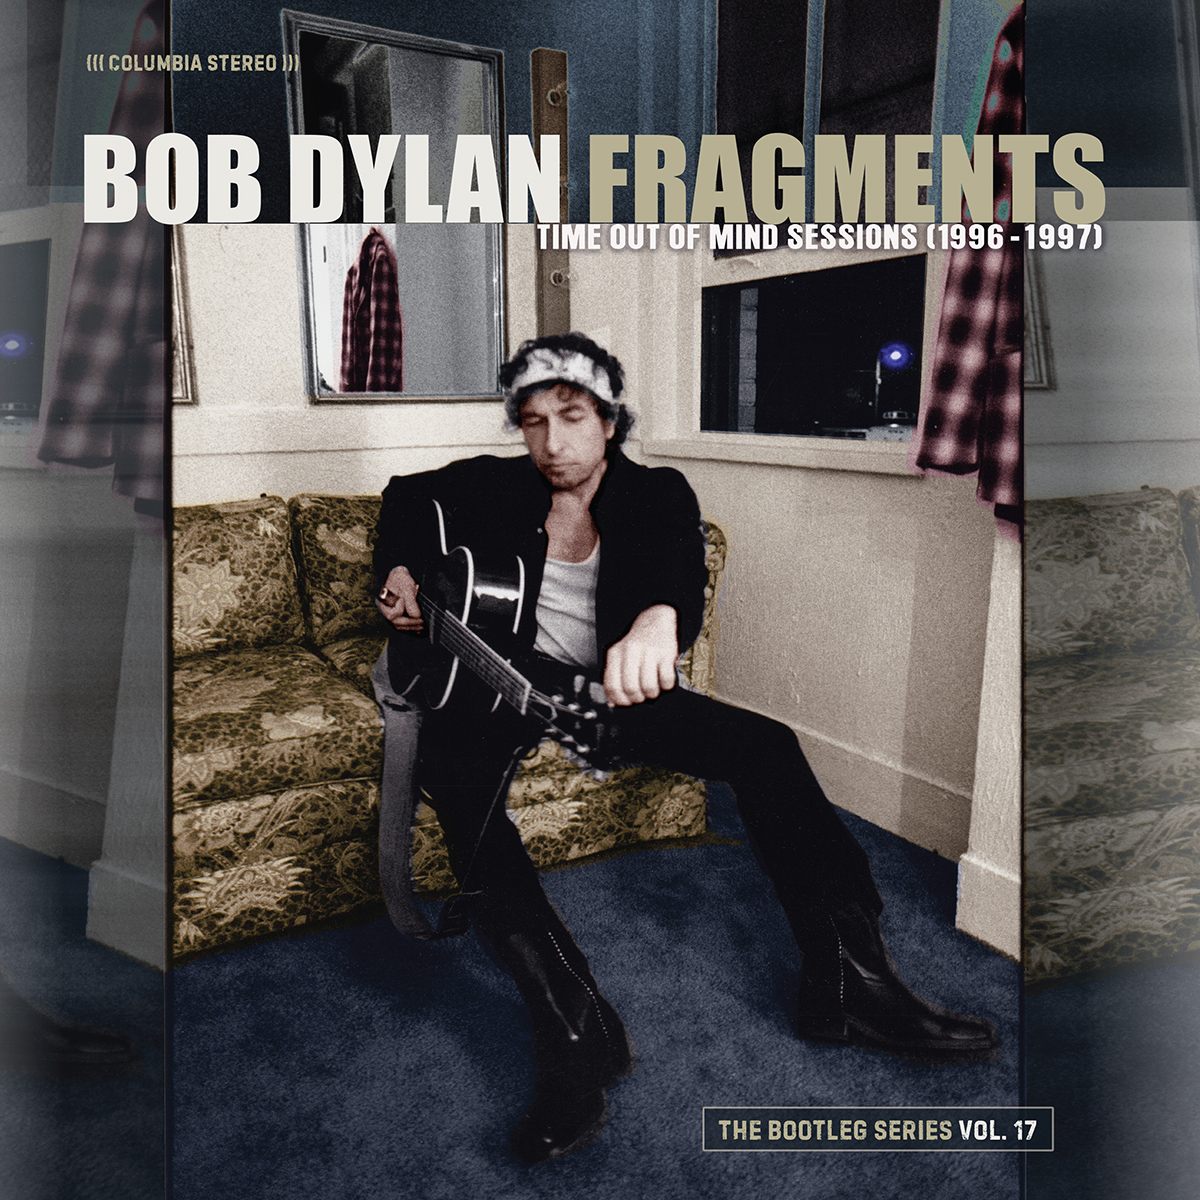 Bob Dylan &#8211; Fragments – Time Out Of Mind Sessions (1996-1997): The Bootleg Series Vol. 17, Out Today